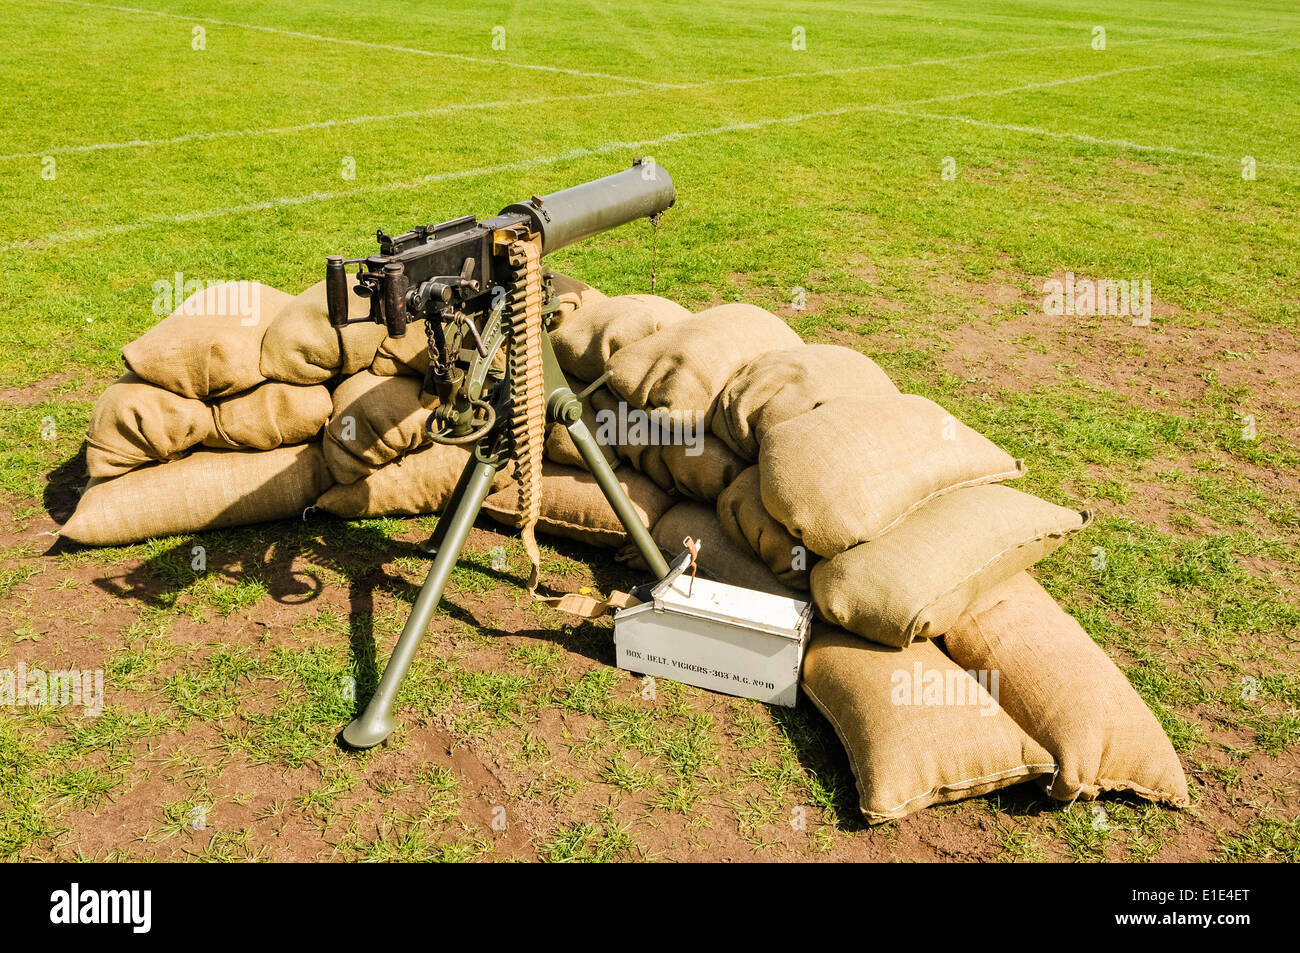 Vickers water cooled medium machine gun surrounded with sandbags, as used in World War 1. Stock Photo